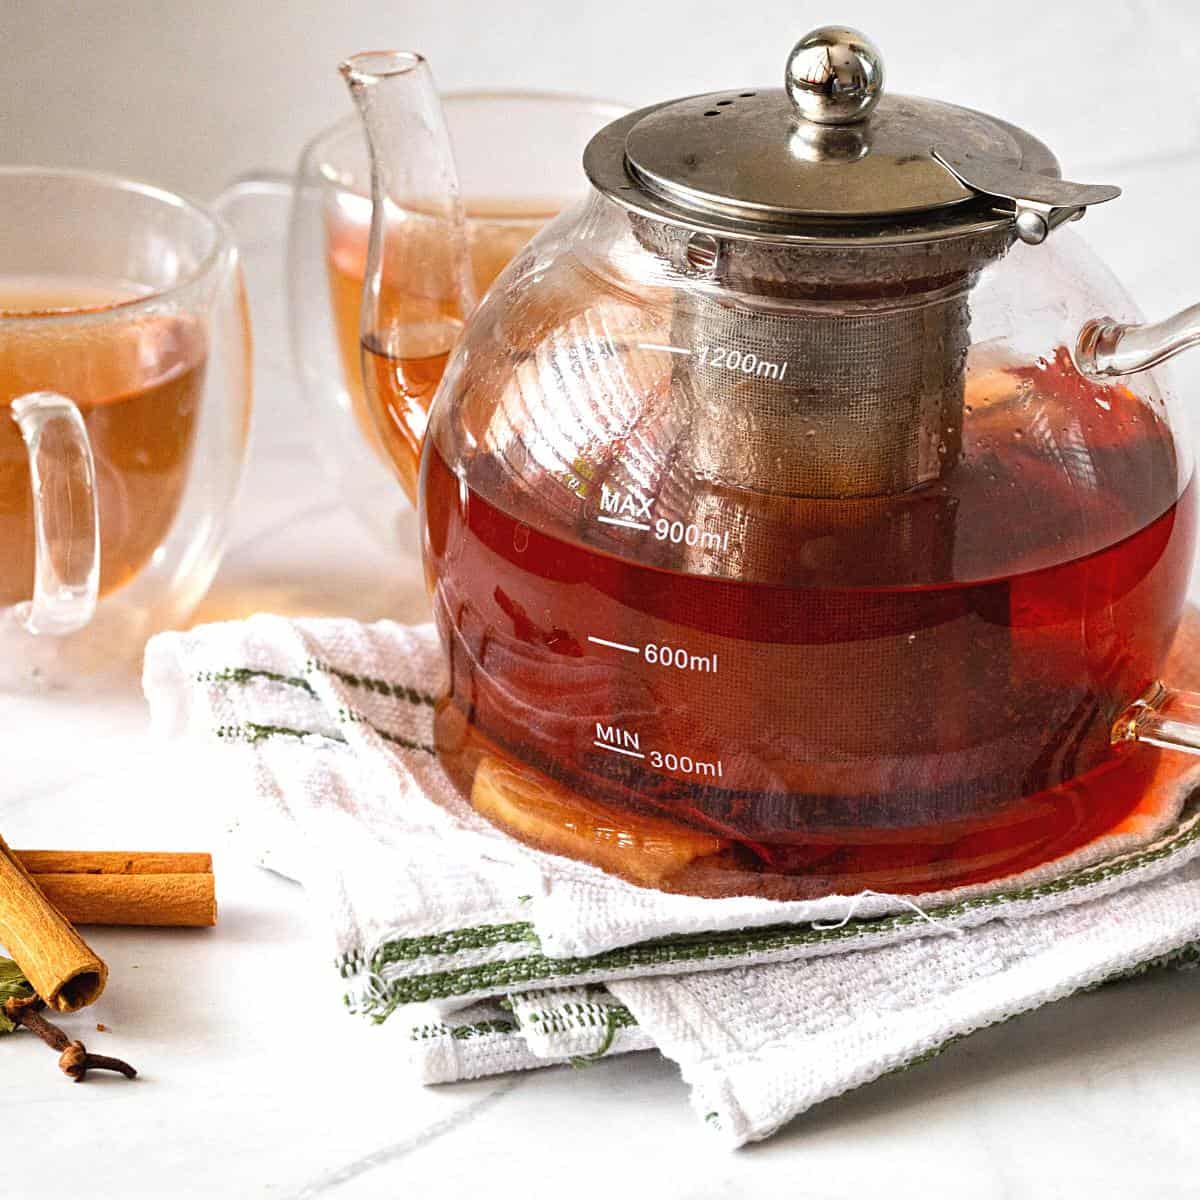 A glass kettle with spiced ginger tea.